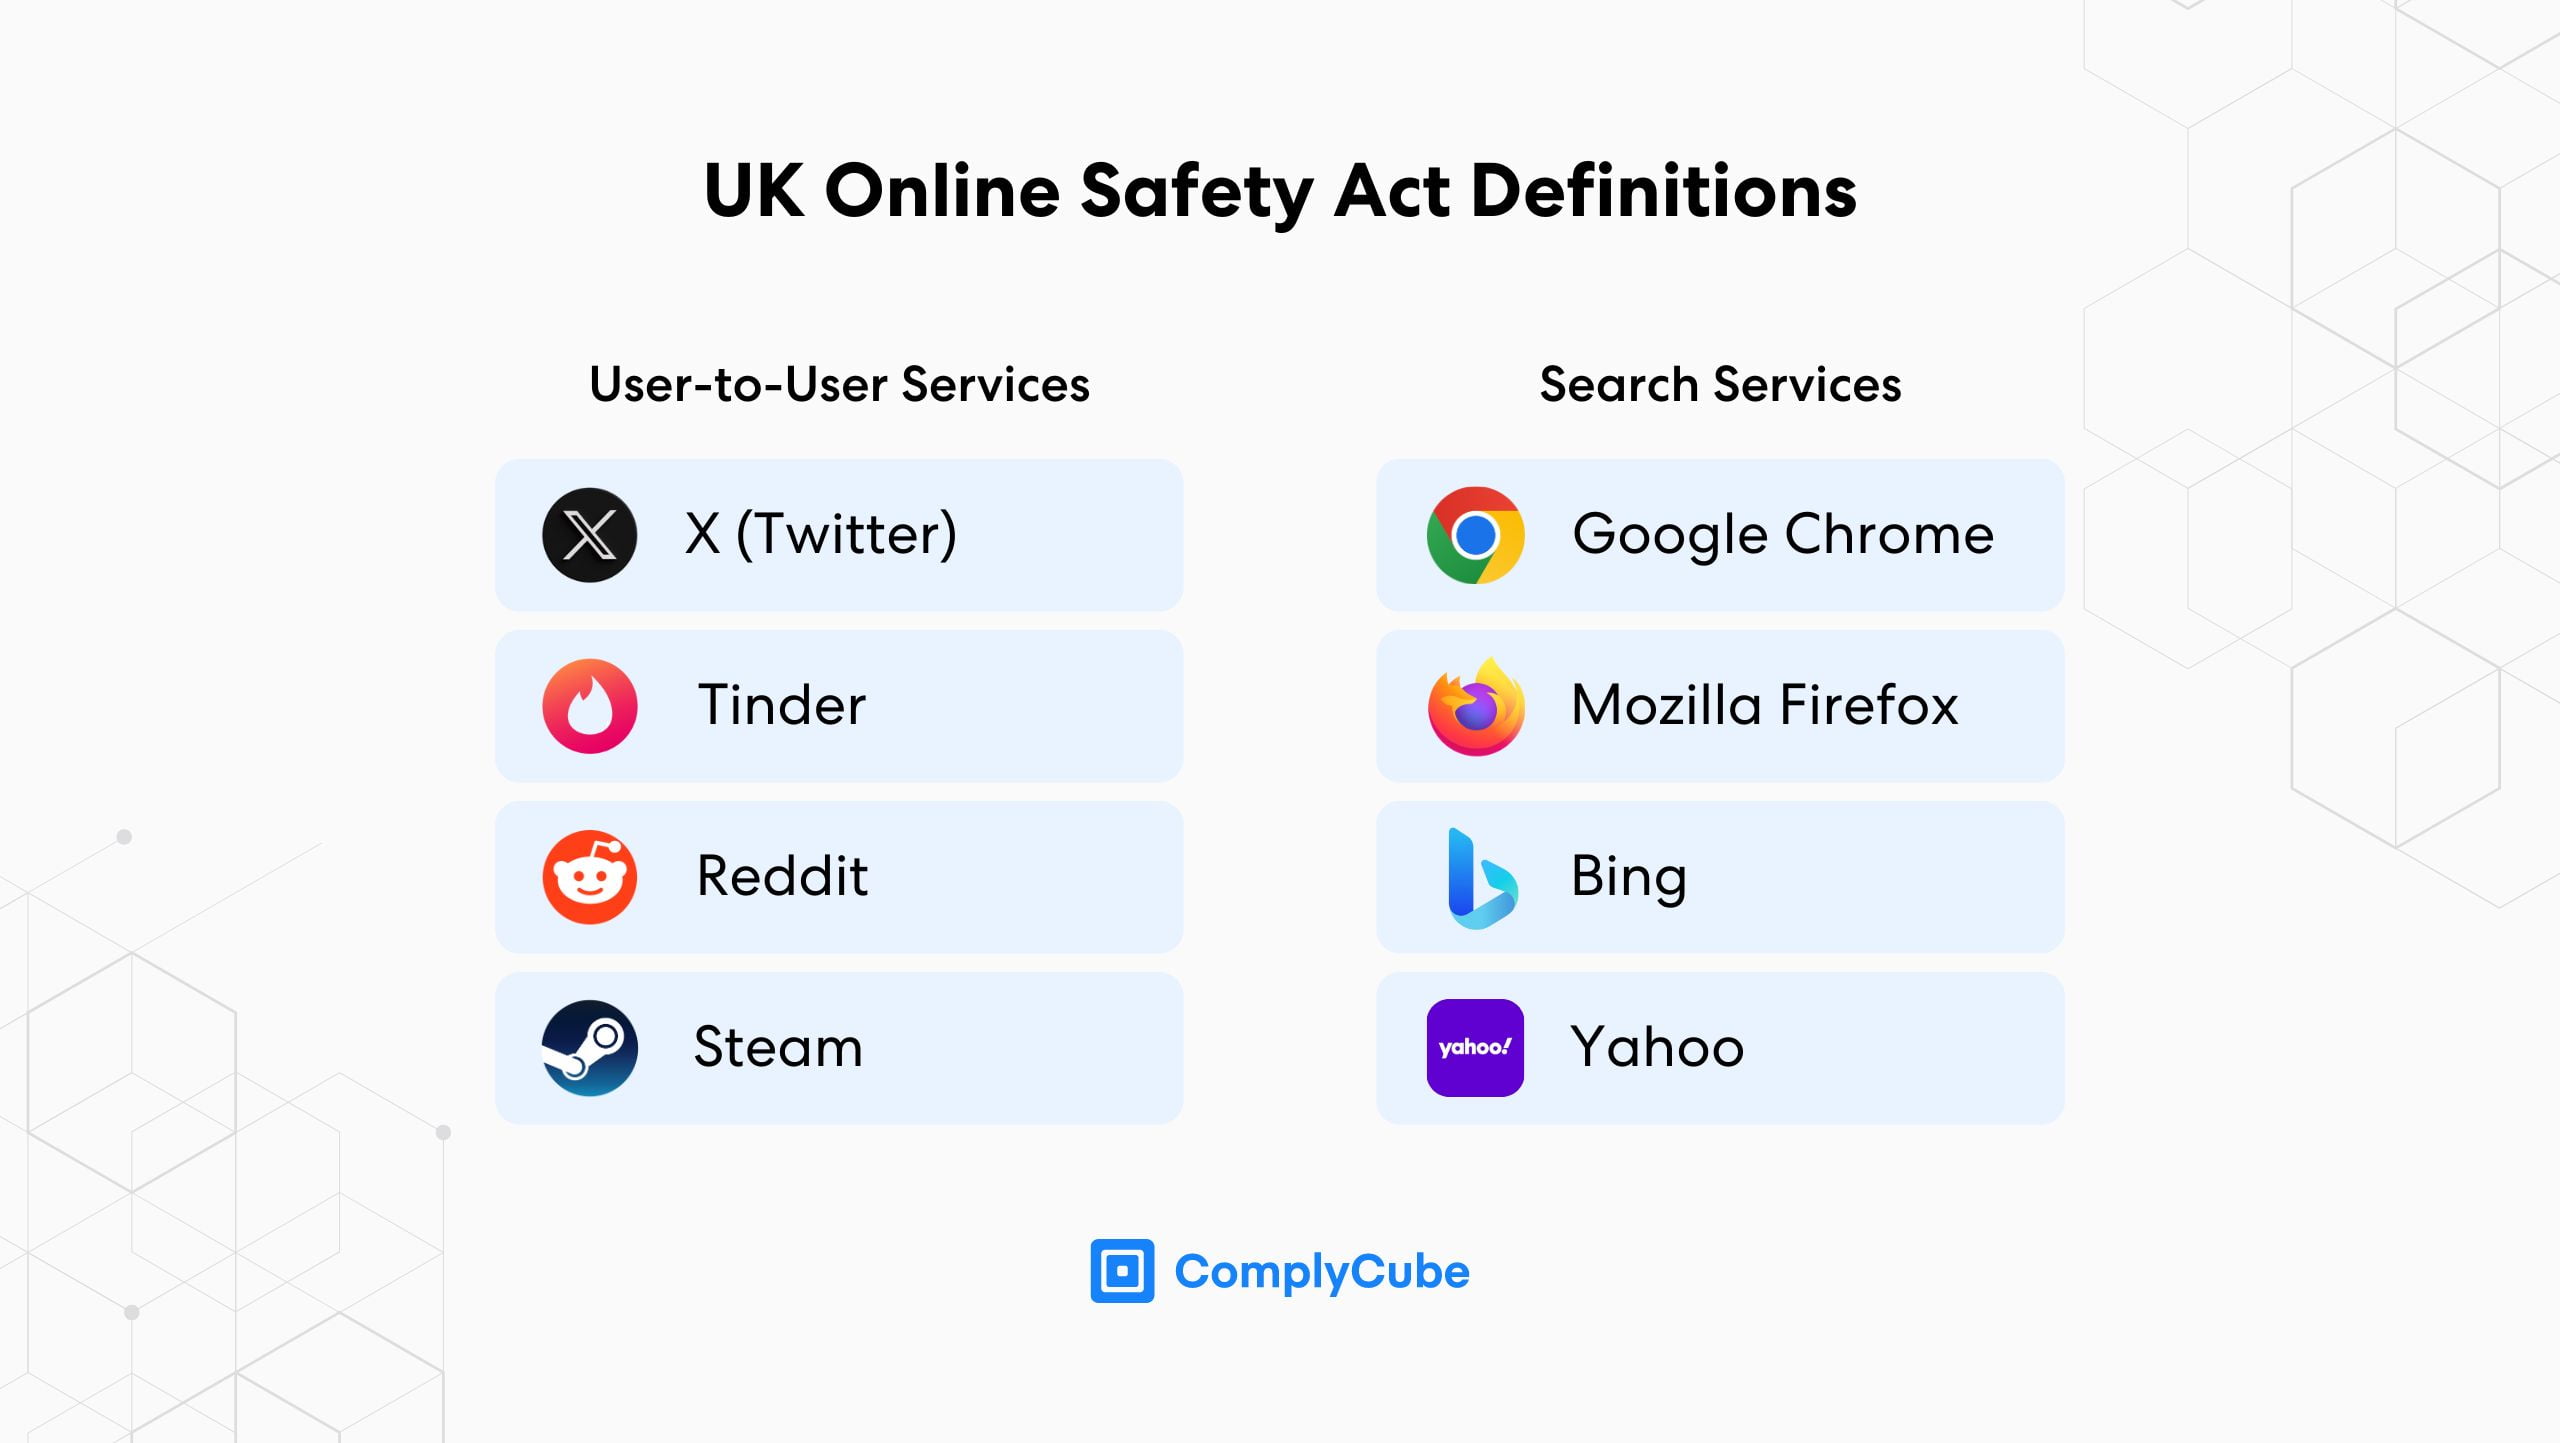 Regulated services under the UK Online Safety Bill that will need to introduce an age and identity verification system.